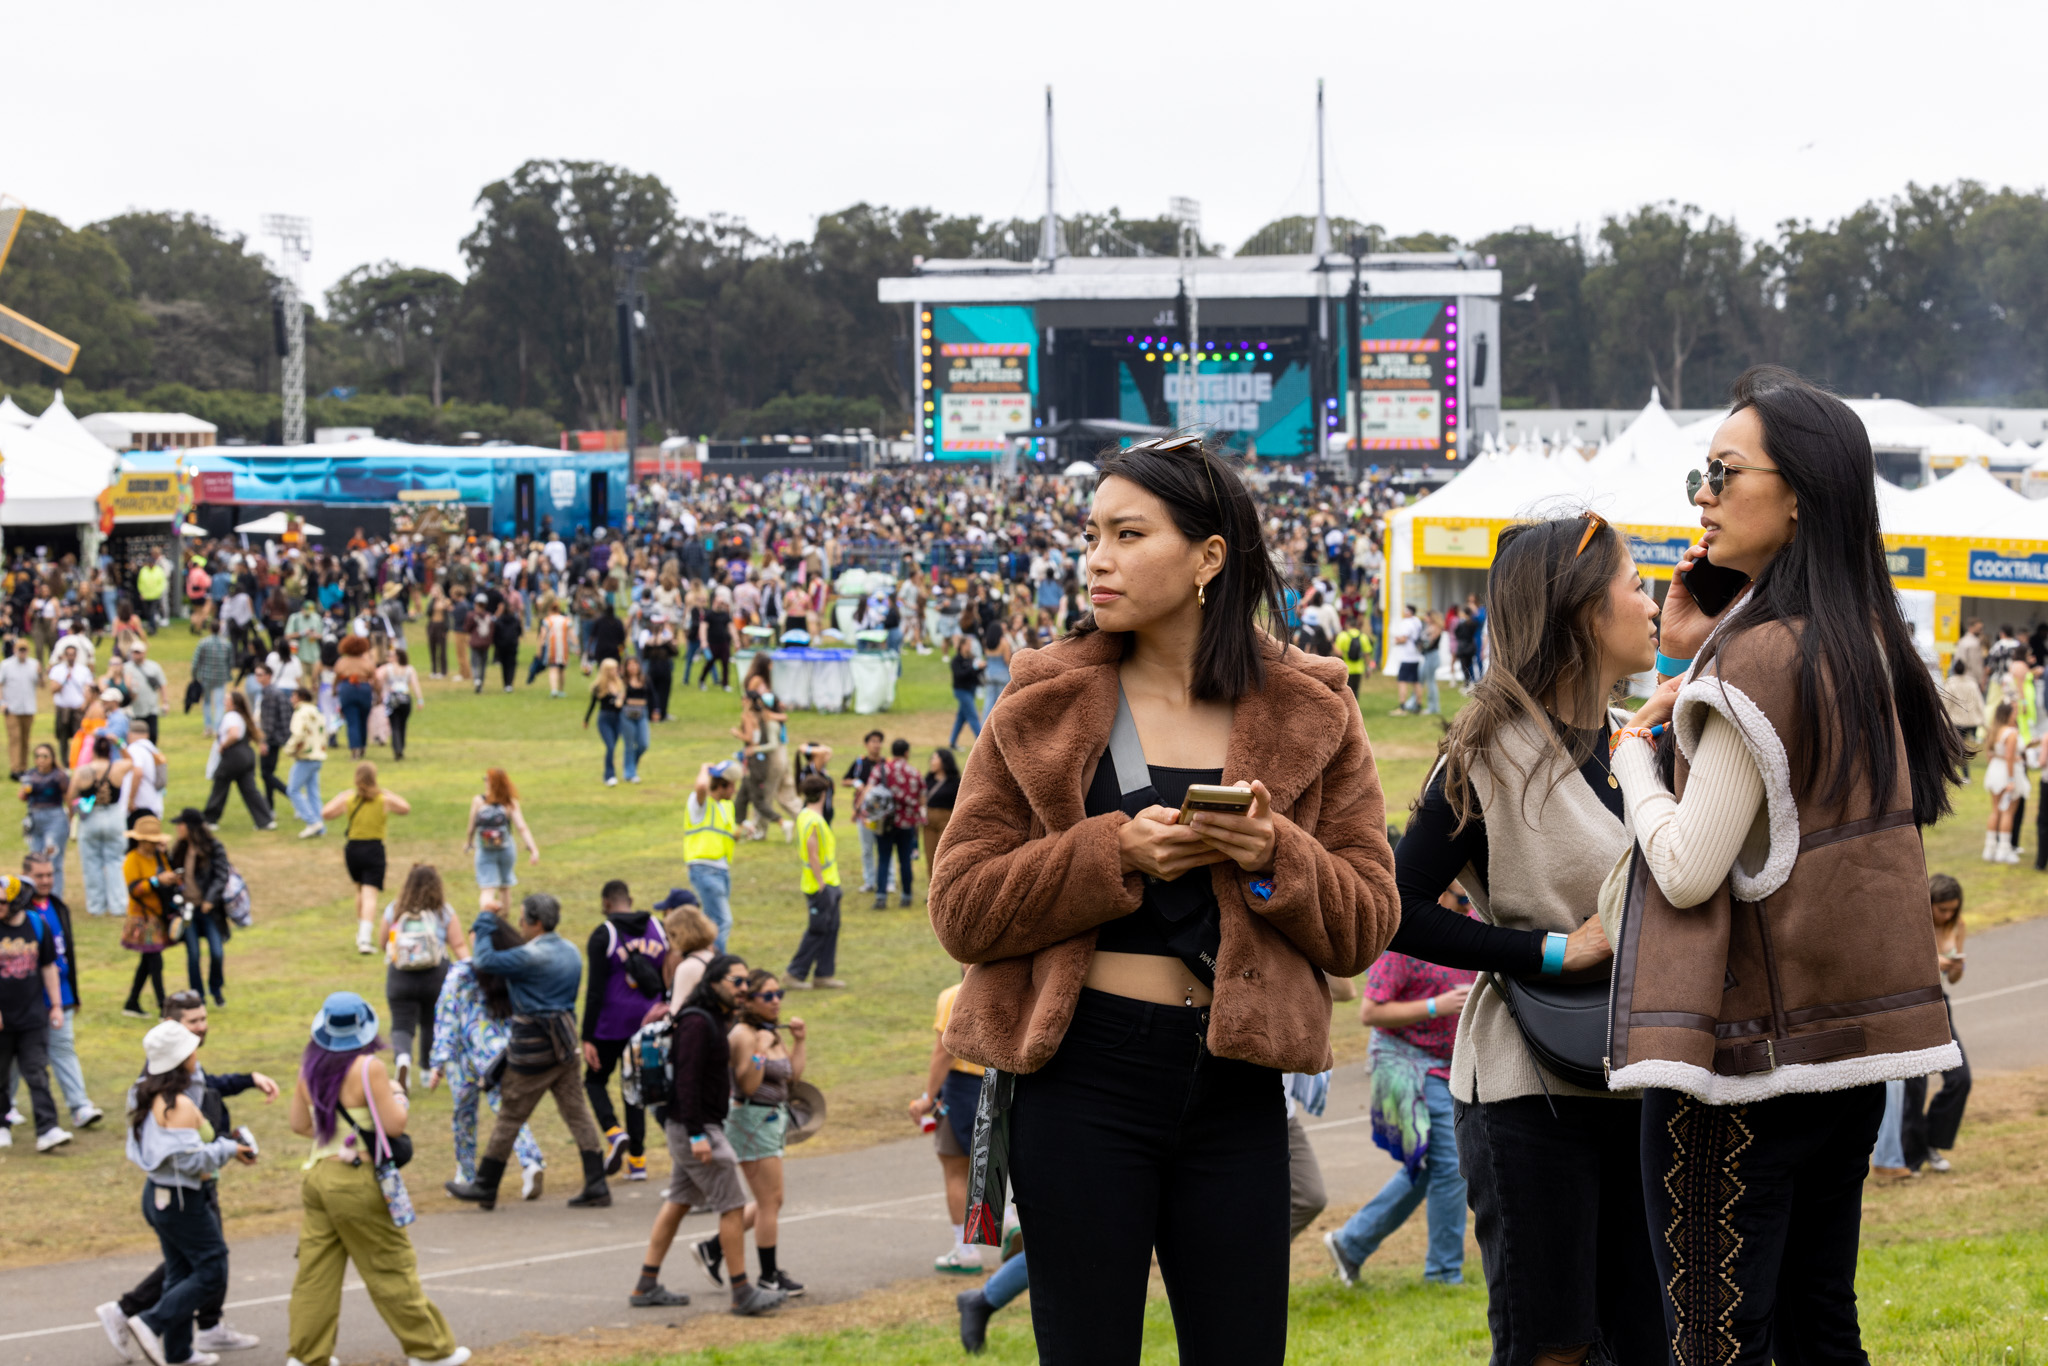 A woman holds her cellphone at the Outside Lands Music Festival in Golden Gate Park.